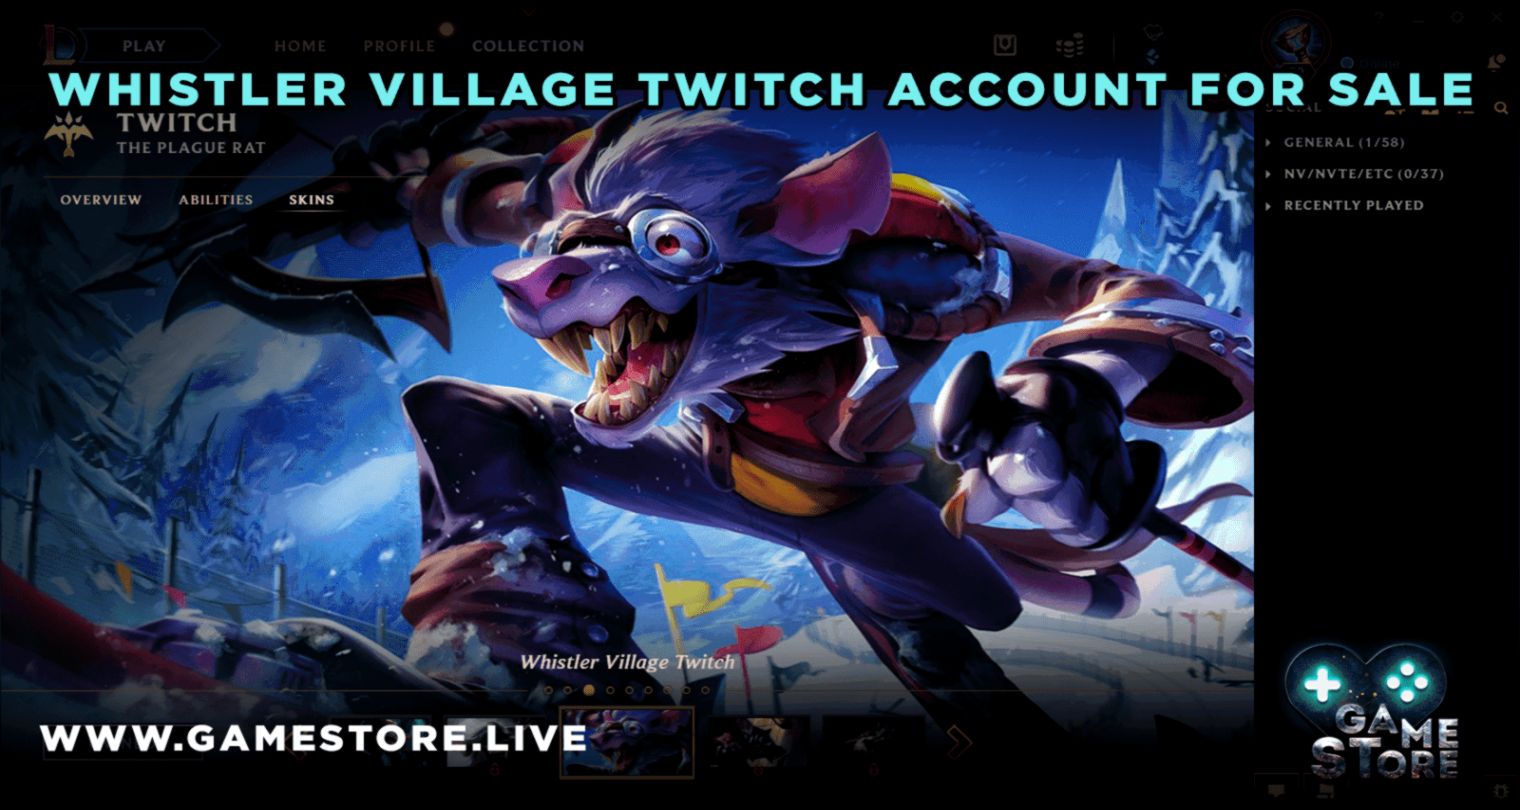 Whistler Village Twitch Skin With Account For Sale - League Of Legends Wallpapers Full Hd - HD Wallpaper 